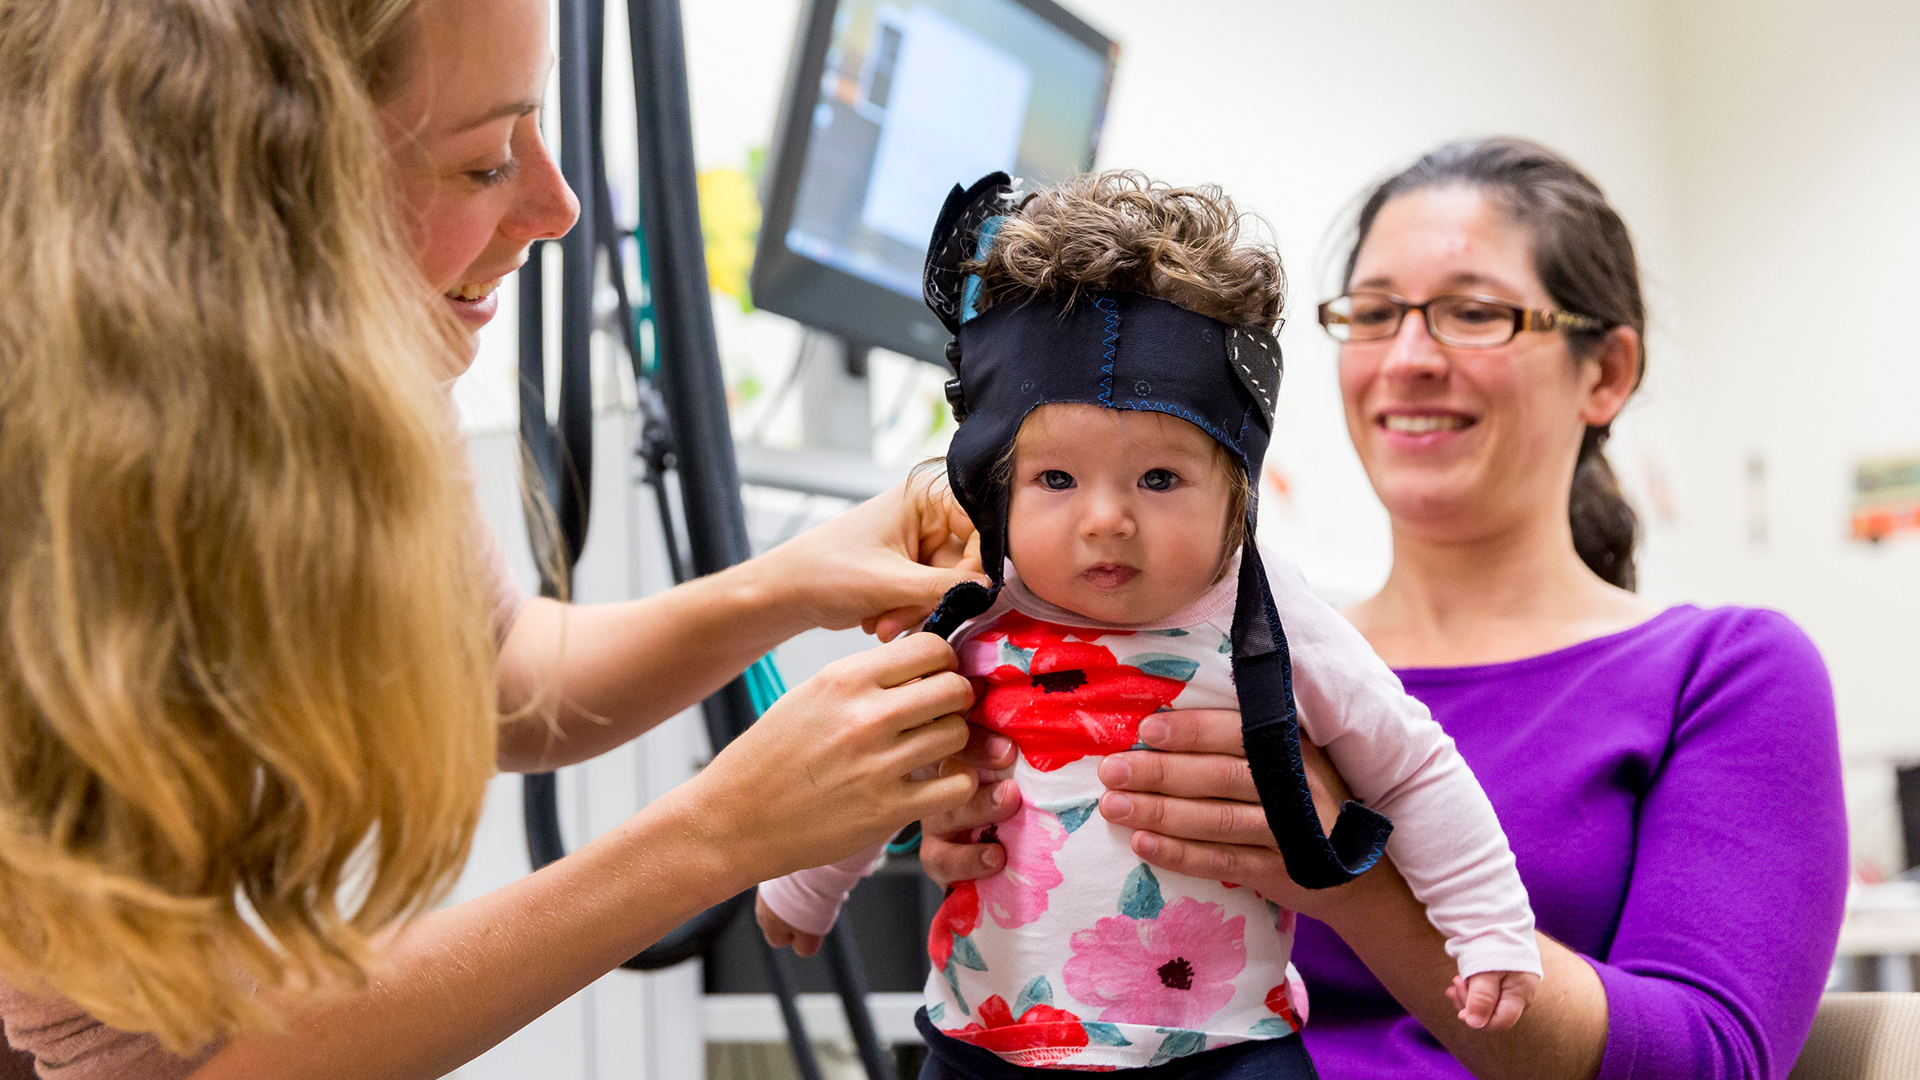 A toddler wearing a headband is held by two smiling female graduate students